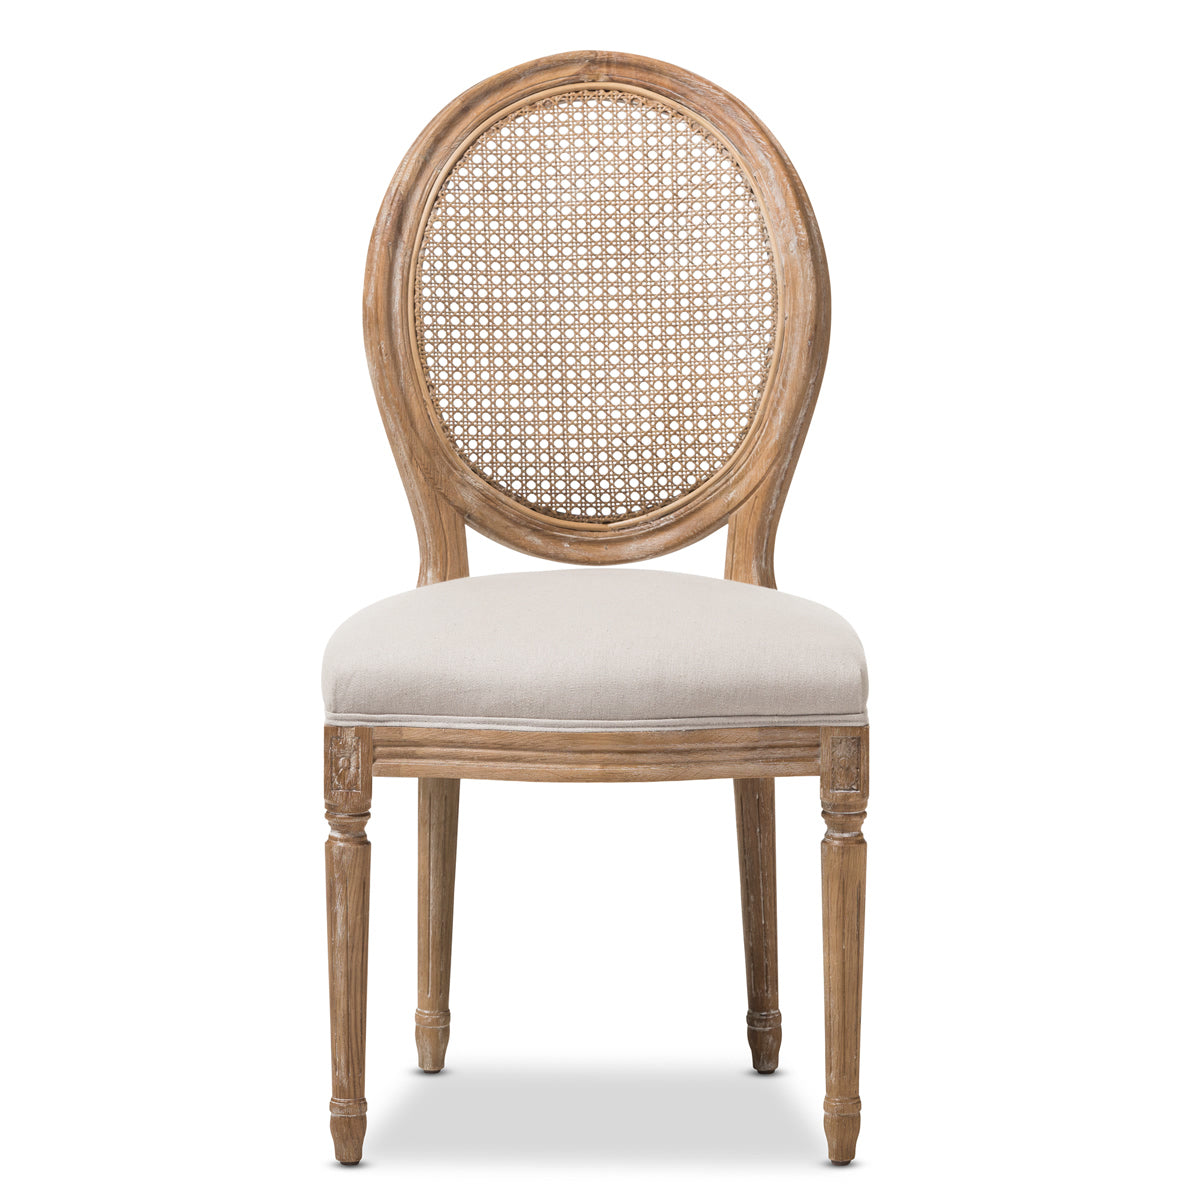 Baxton Studio Adelia French Vintage Cottage Weathered Oak Finish Wood and Beige Fabric Upholstered Dining Side Chair with Round Cane Back Baxton Studio-dining chair-Minimal And Modern - 3